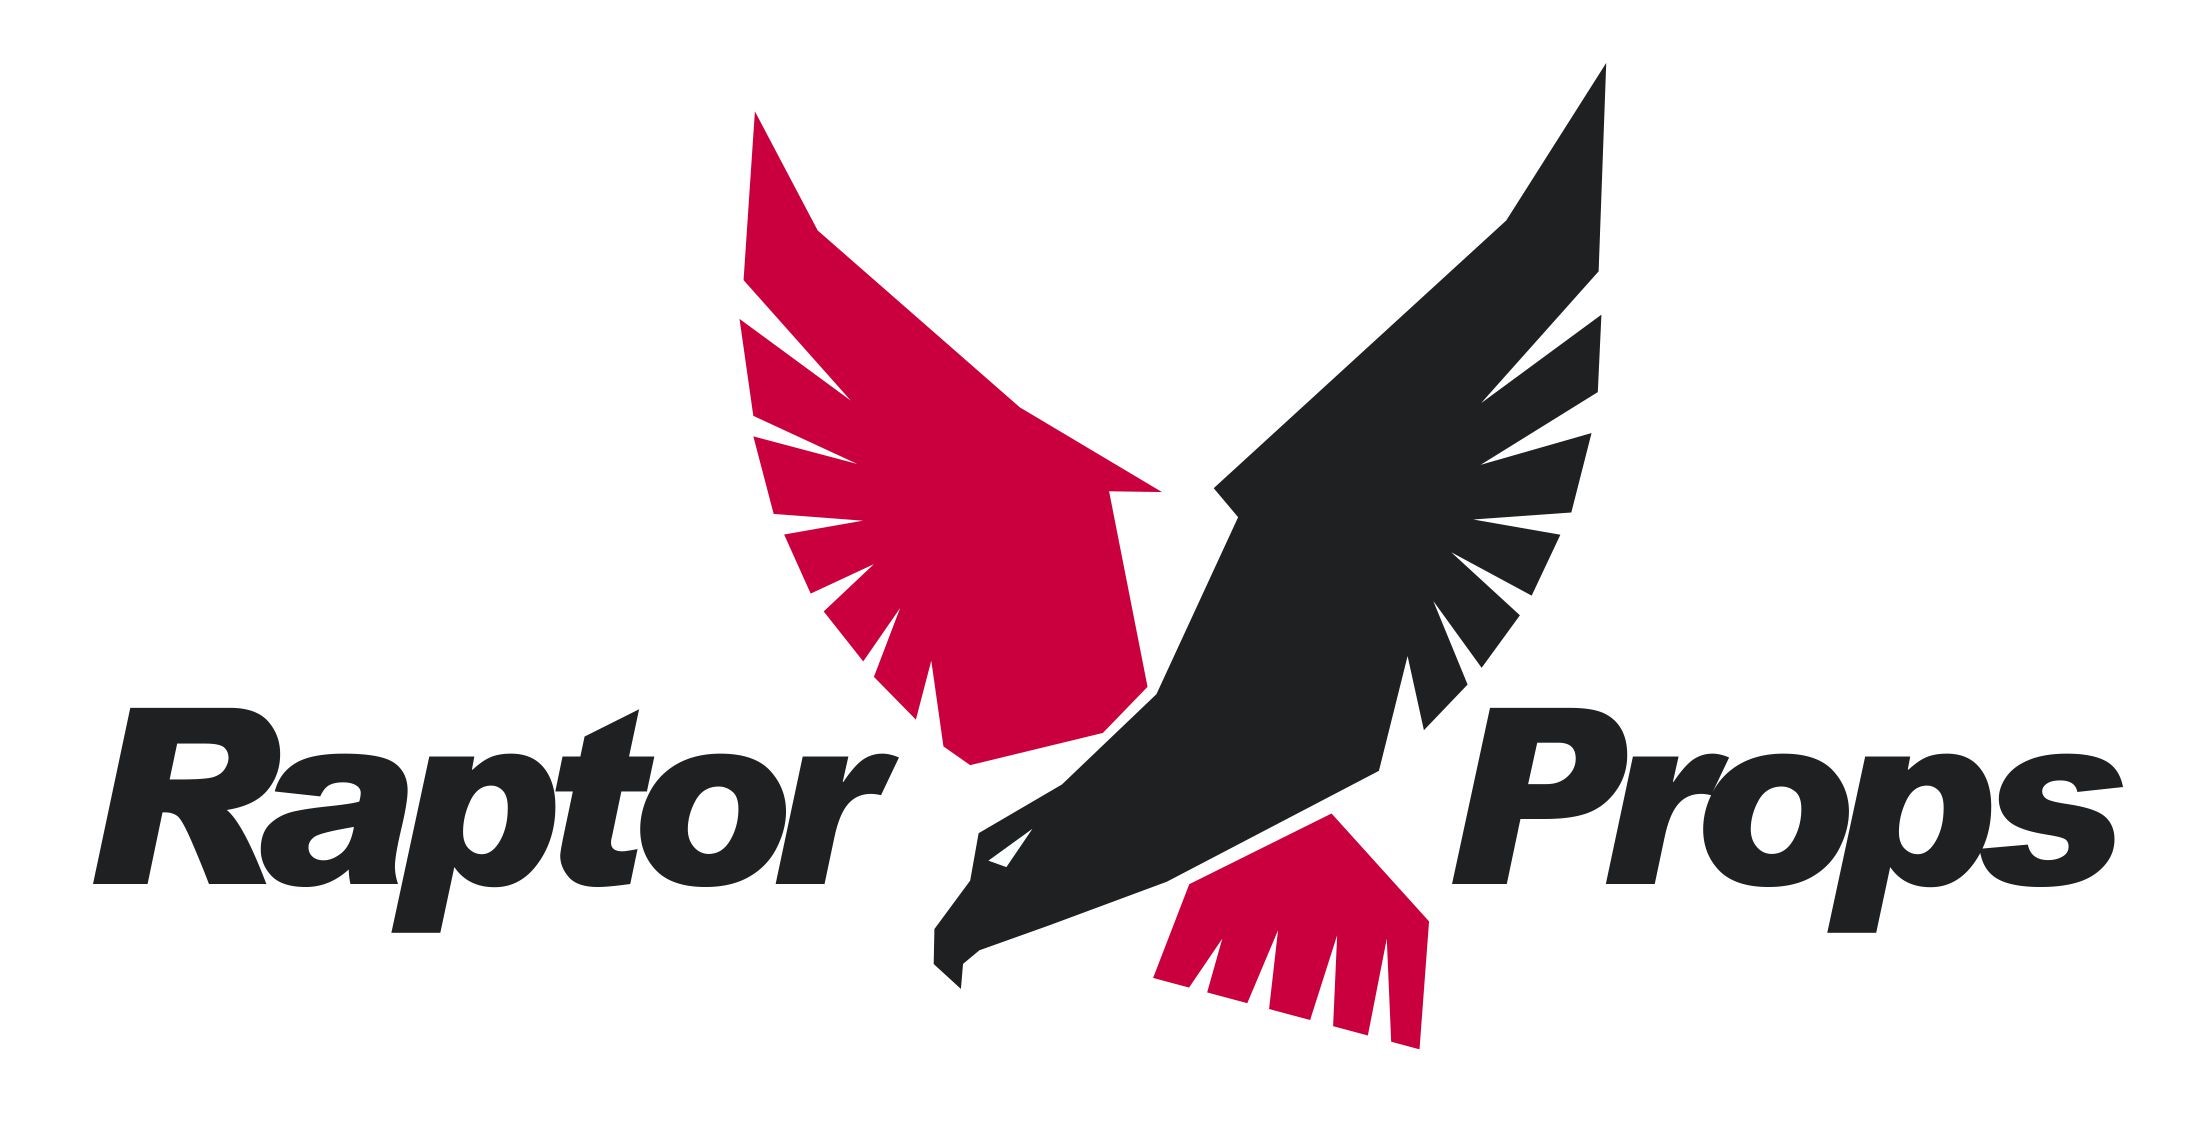 A bird-themed logo for a website's main page.